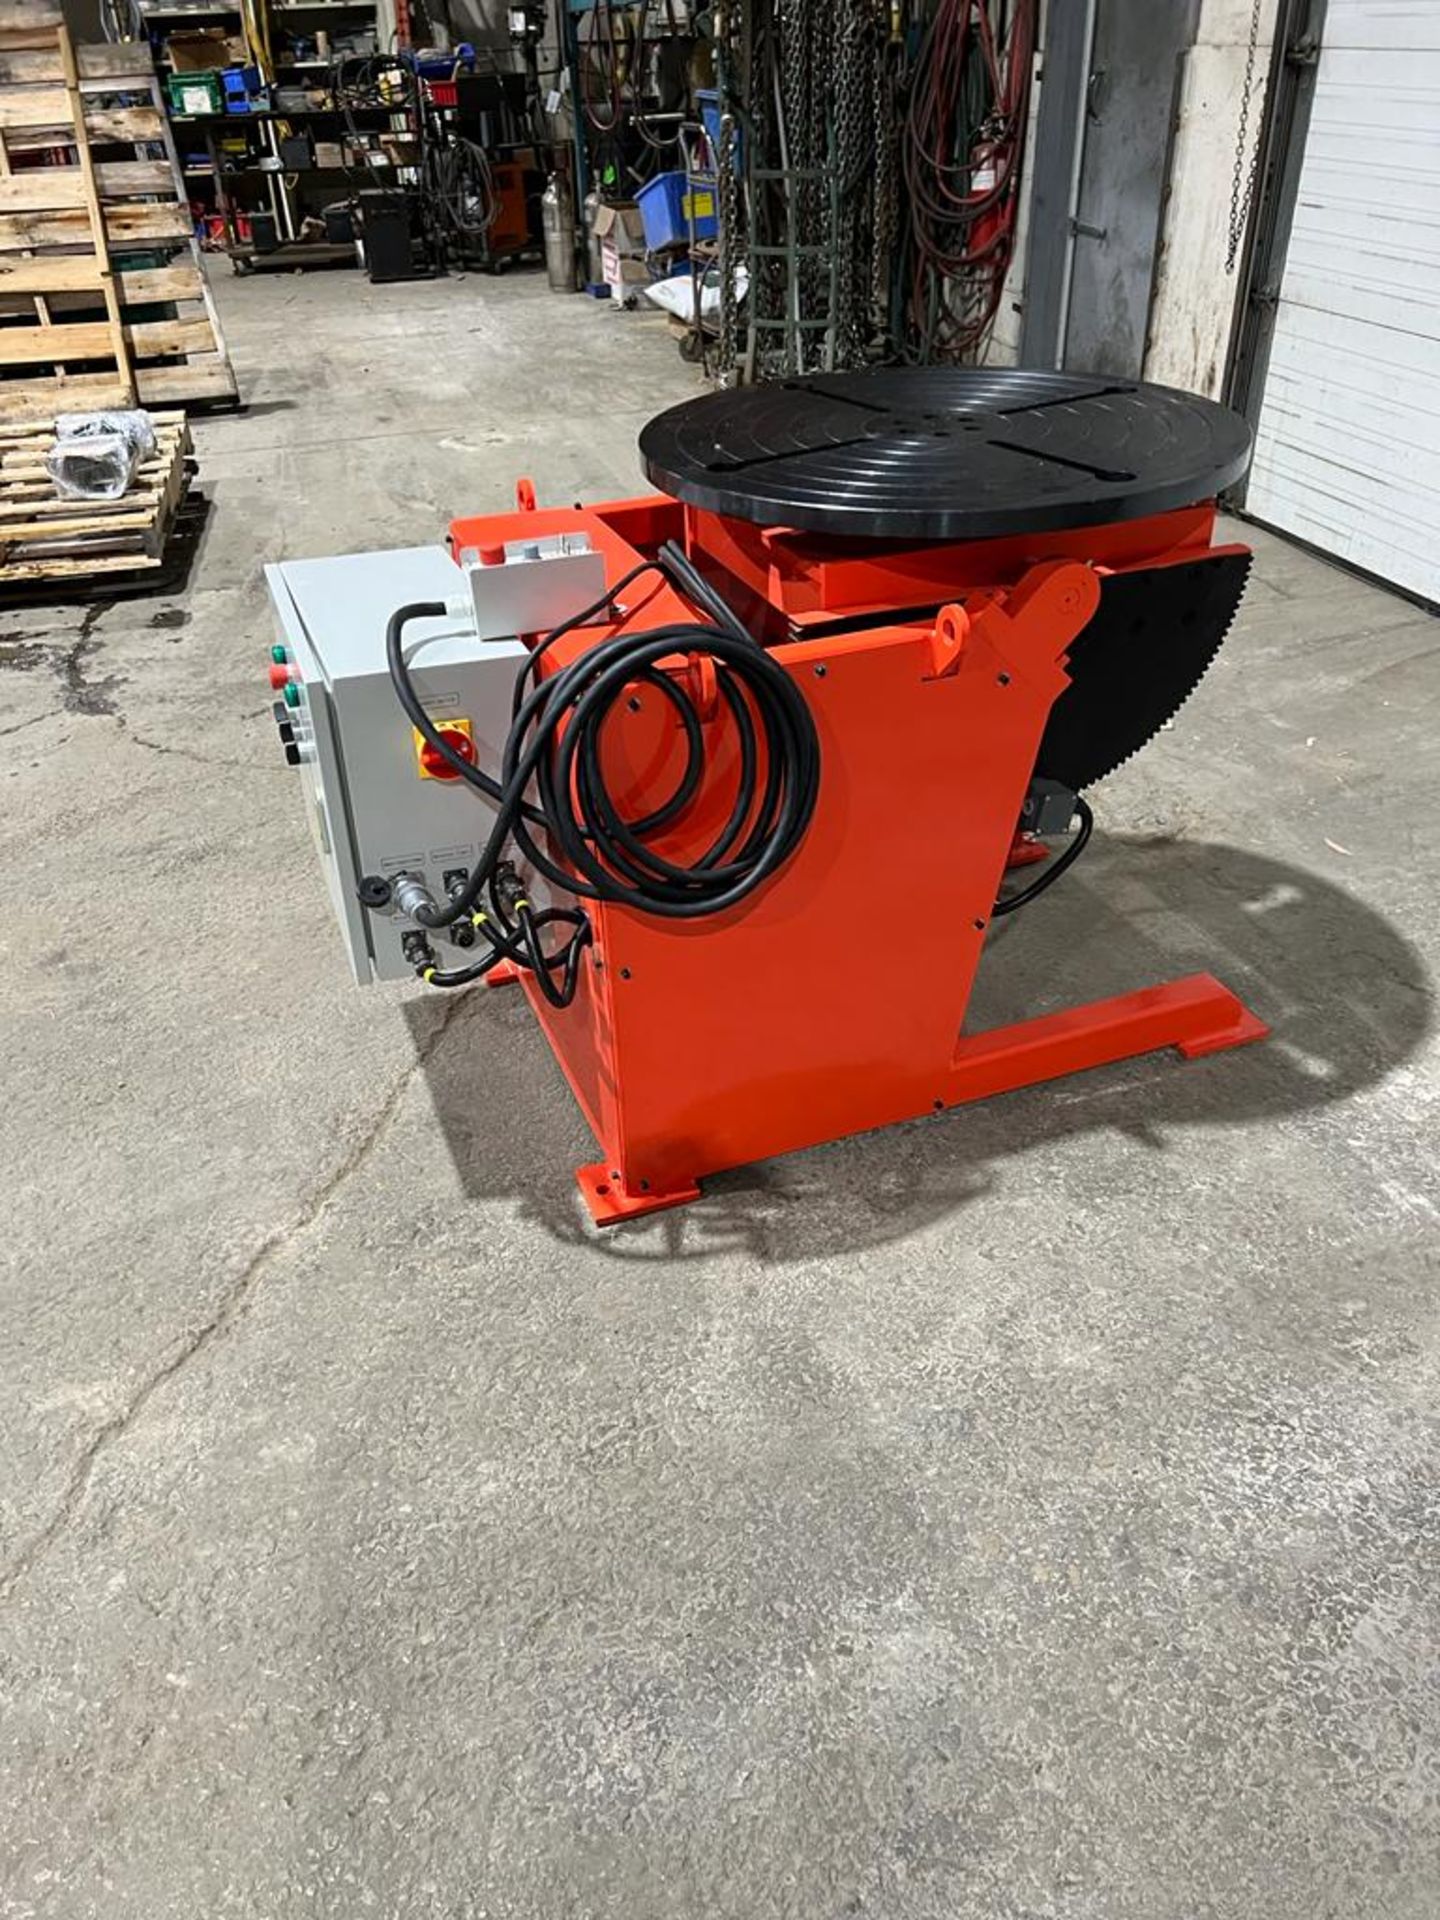 Verner model VD-1500 WELDING POSITIONER 1500lbs capacity - tilt and rotate with variable speed drive - Image 2 of 5